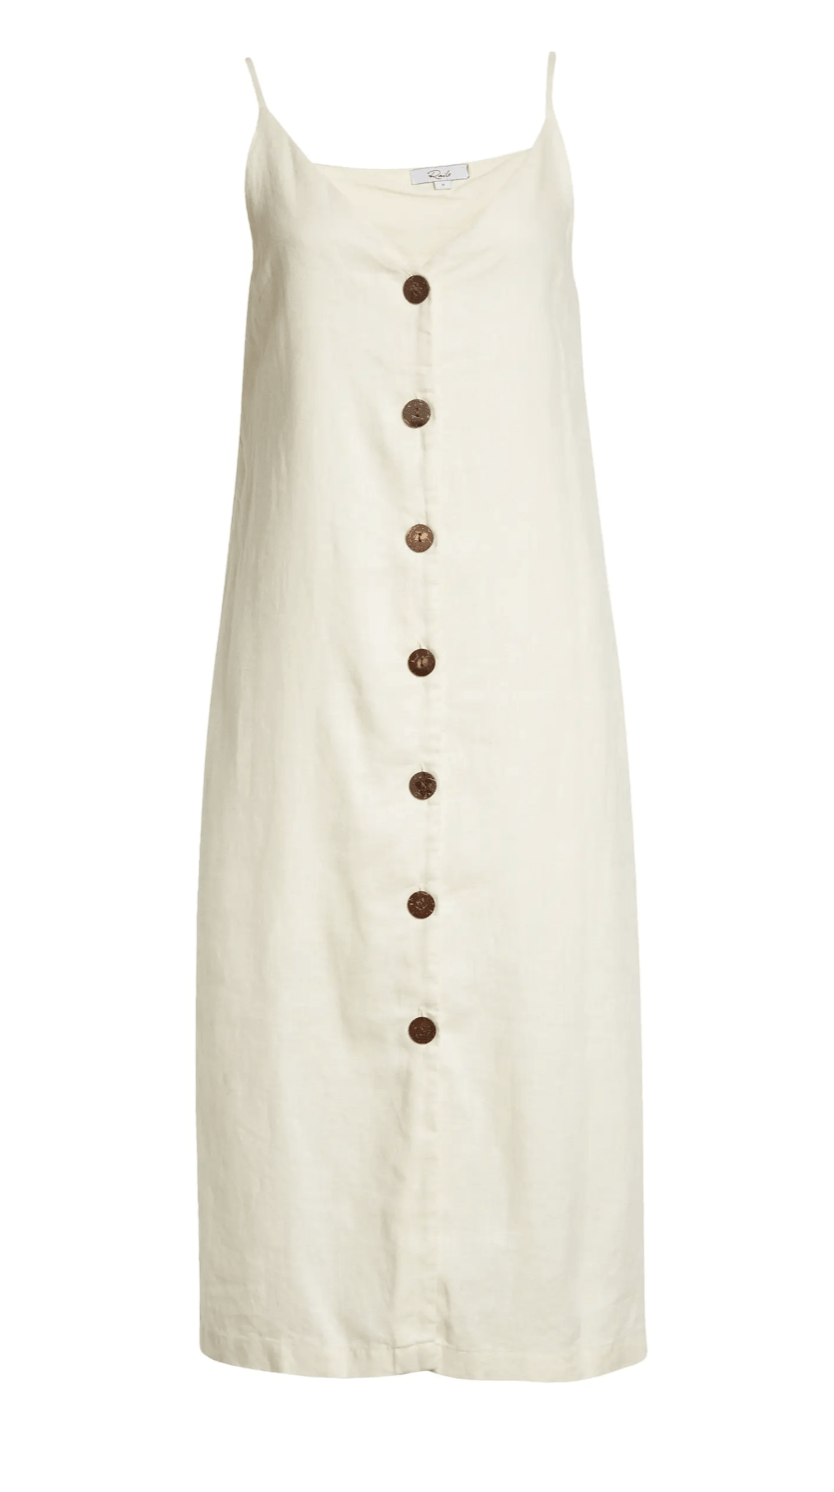 white sleeveless long linen dress with brown buttons down the front